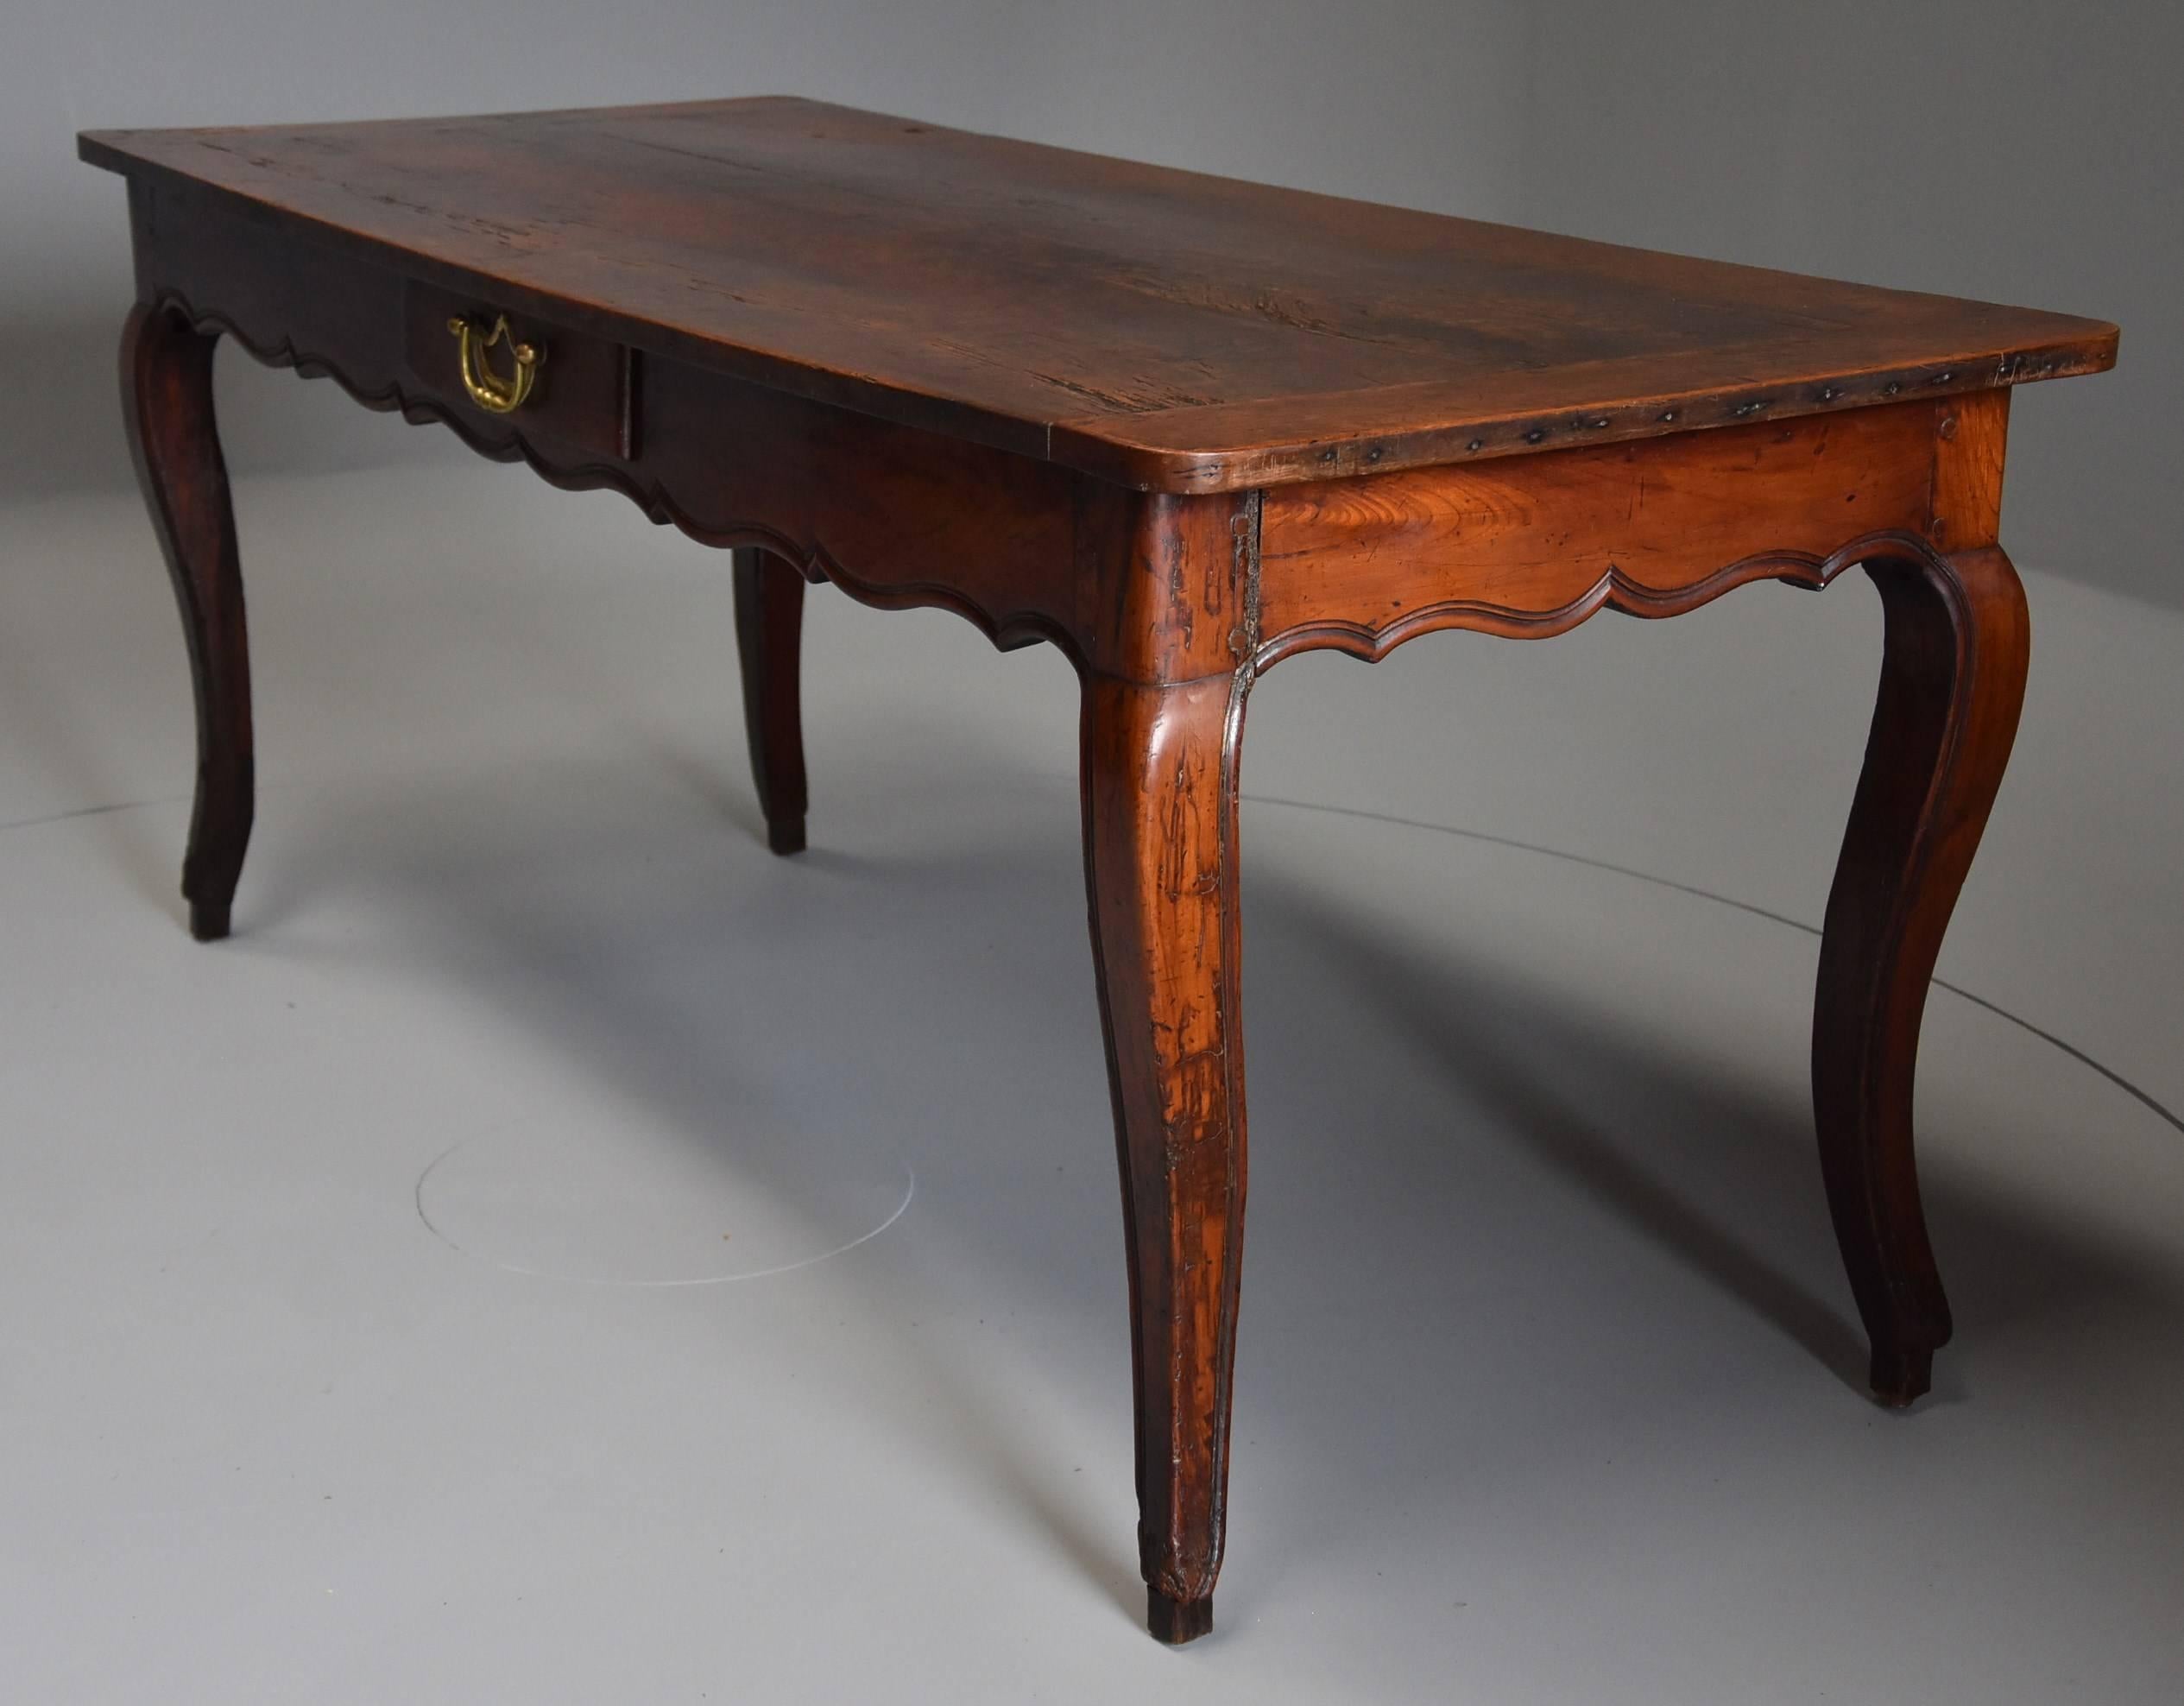 A late 18th century French fruitwood (cherry) farmhouse table in original condition with superb patina (color).

The table consists of a three plank top with cleated ends, the top retaining original wear and having a superb patina.

At the end